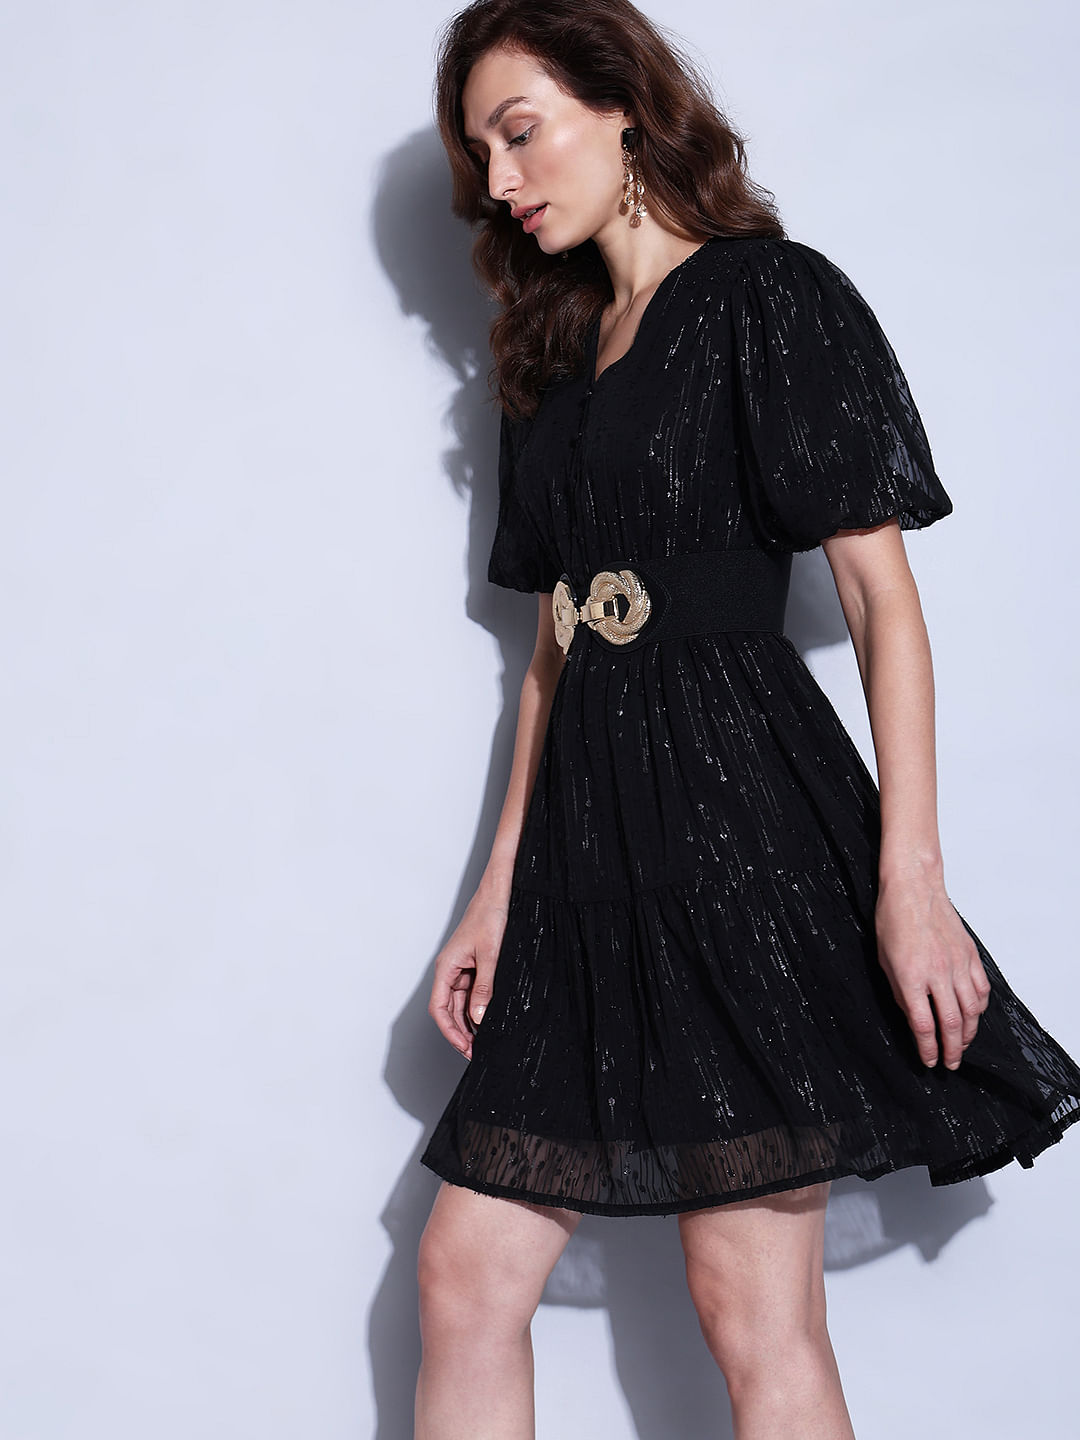 Belize black lace fit and flare dress – Bittano